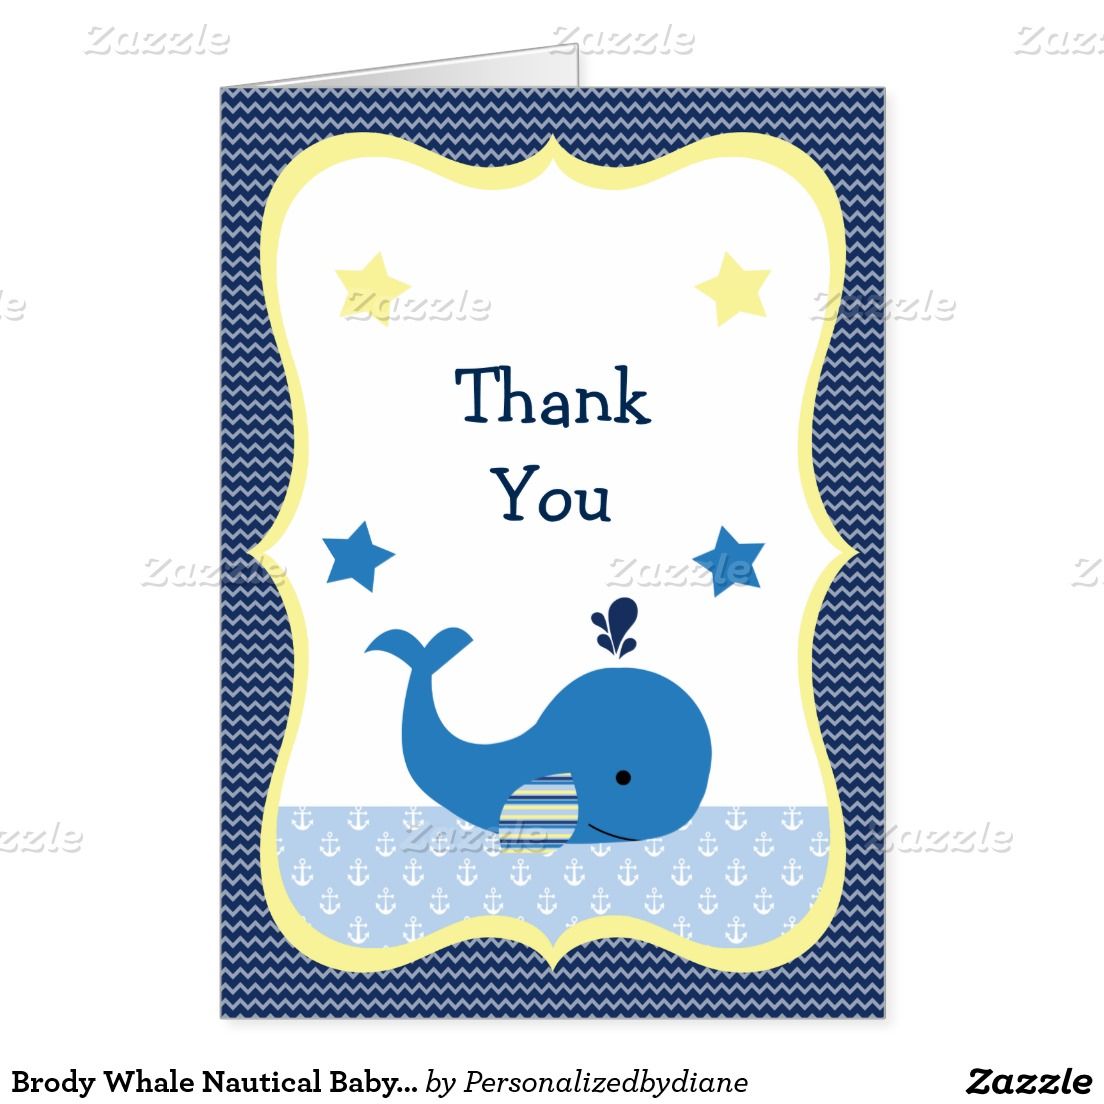 Full Size of Baby Shower:72+ Rousing Baby Shower Thank You Cards Picture Ideas Baby Shower Thank You Cards Brody Whale Nautical Baby Shower Thank You Card